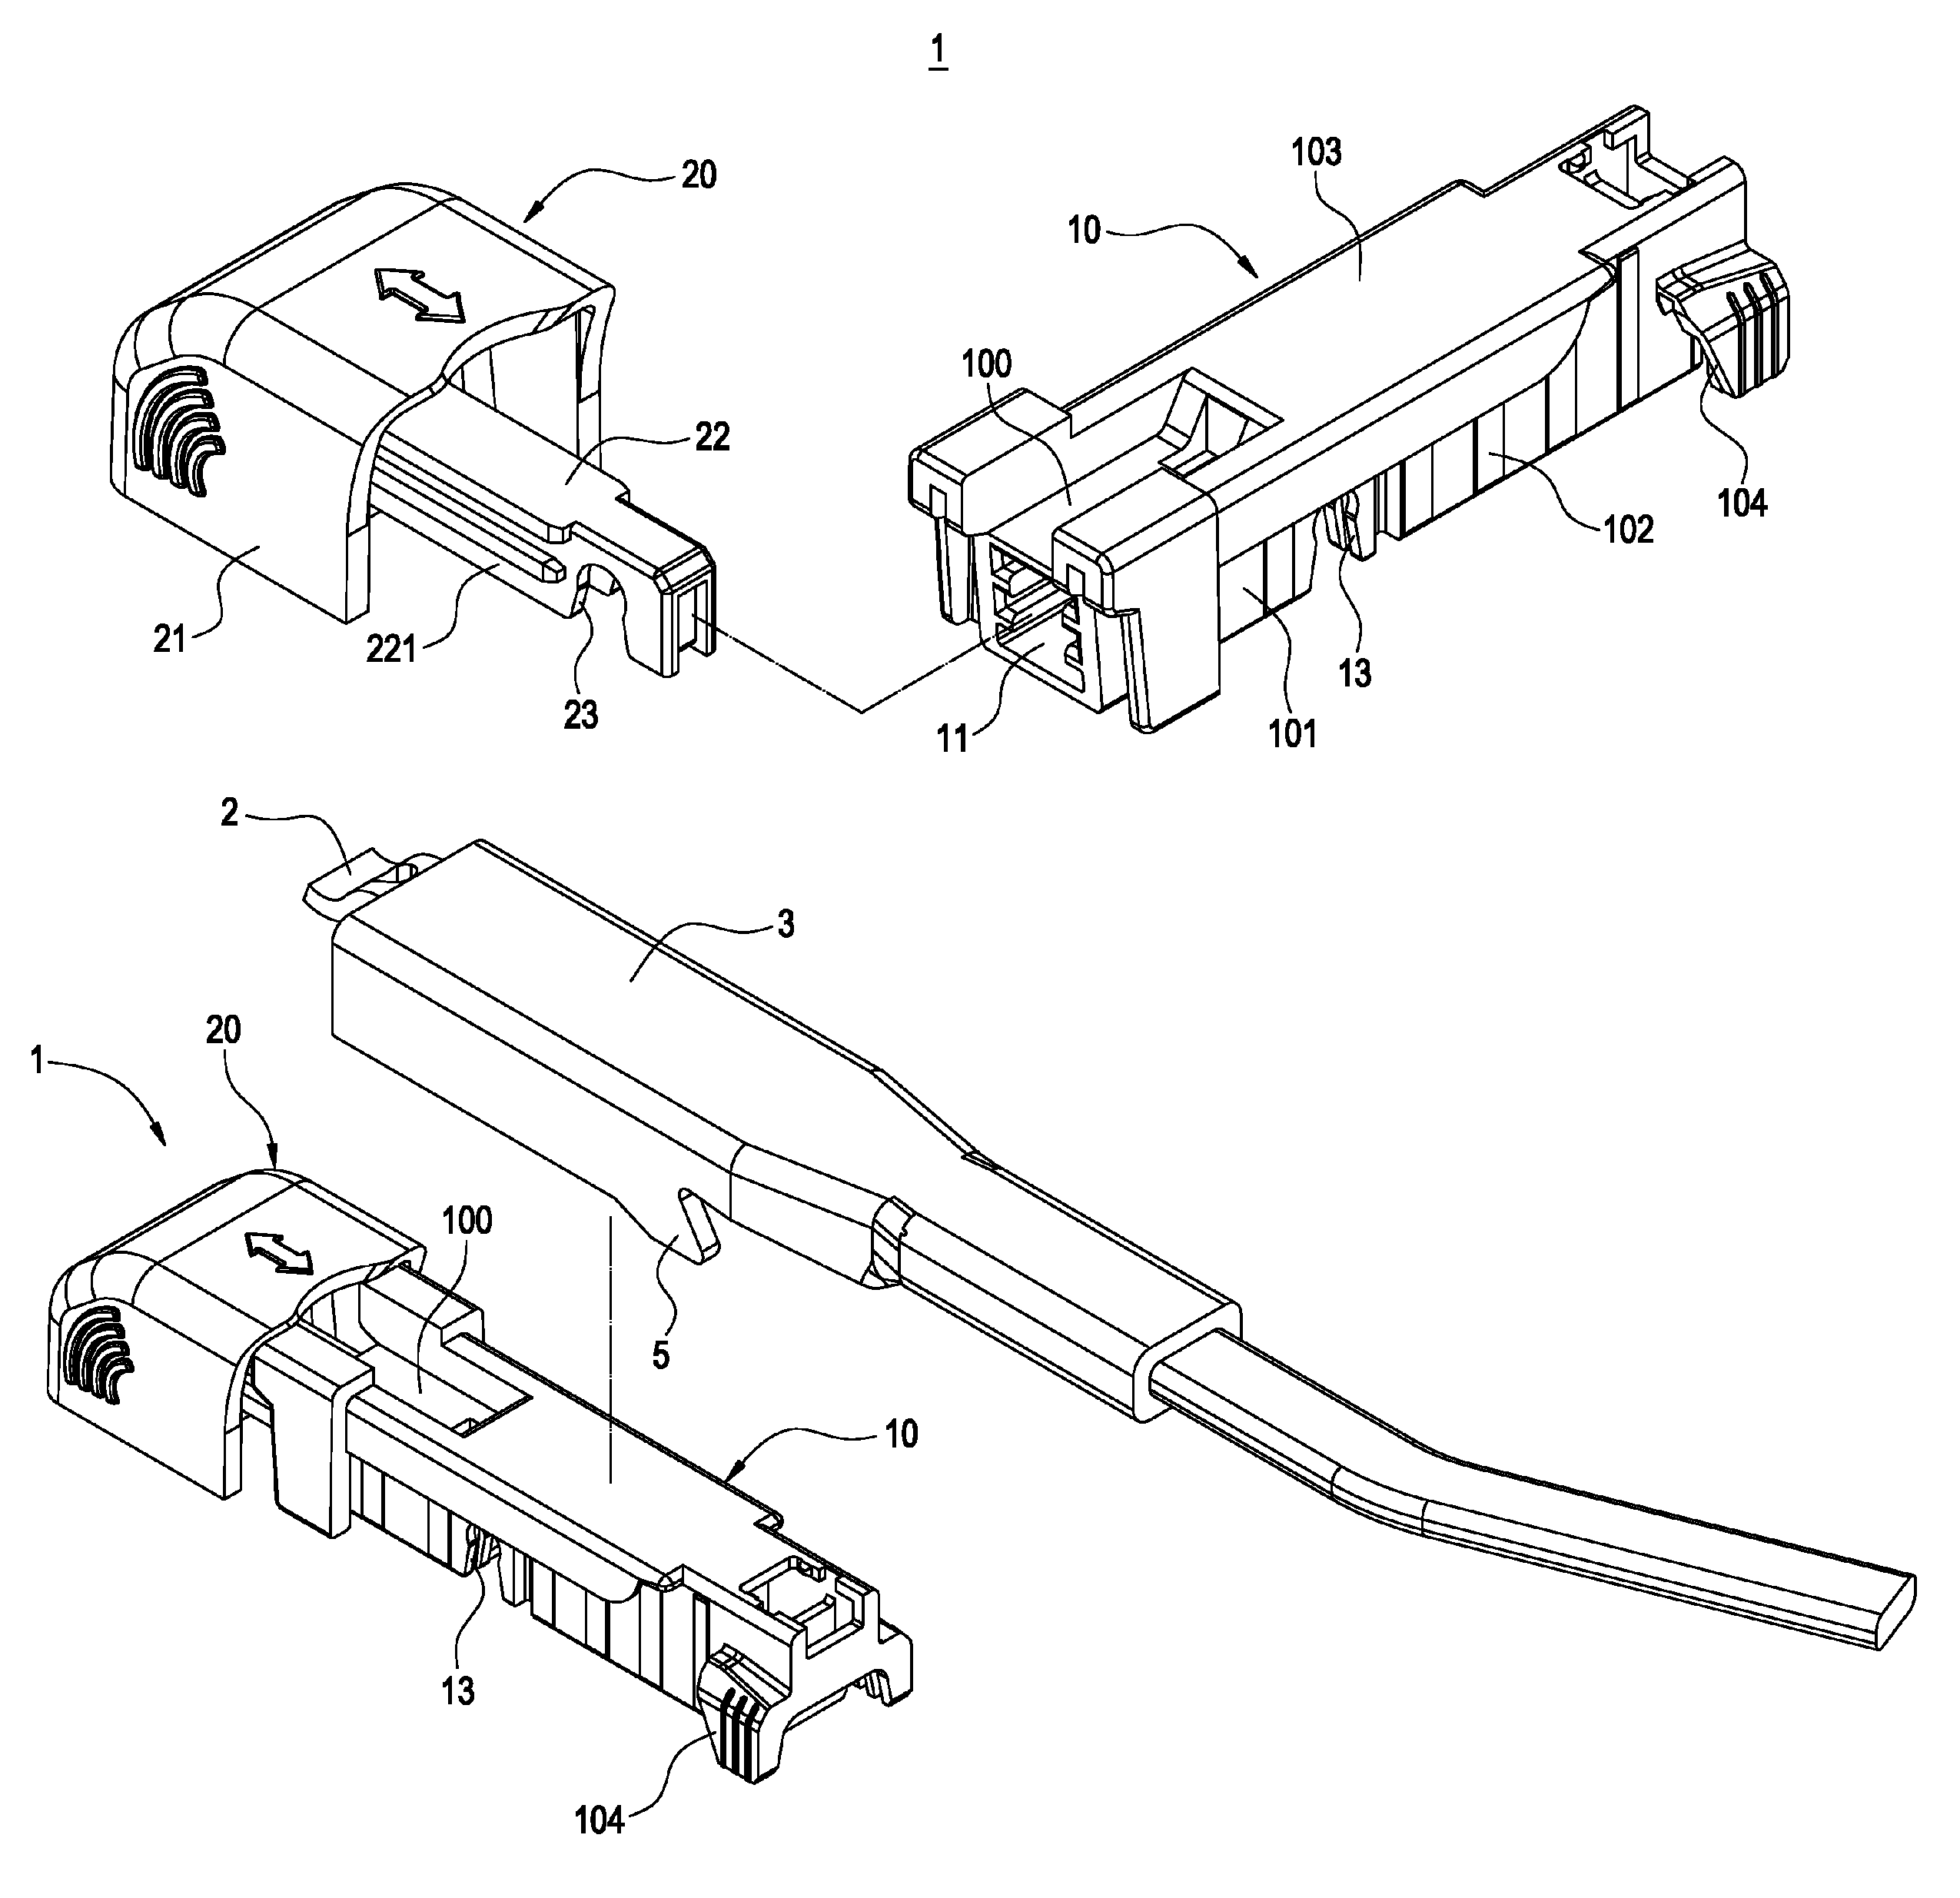 Windshield wiper assembling structure for preventing loose attachment of driven wiper arm